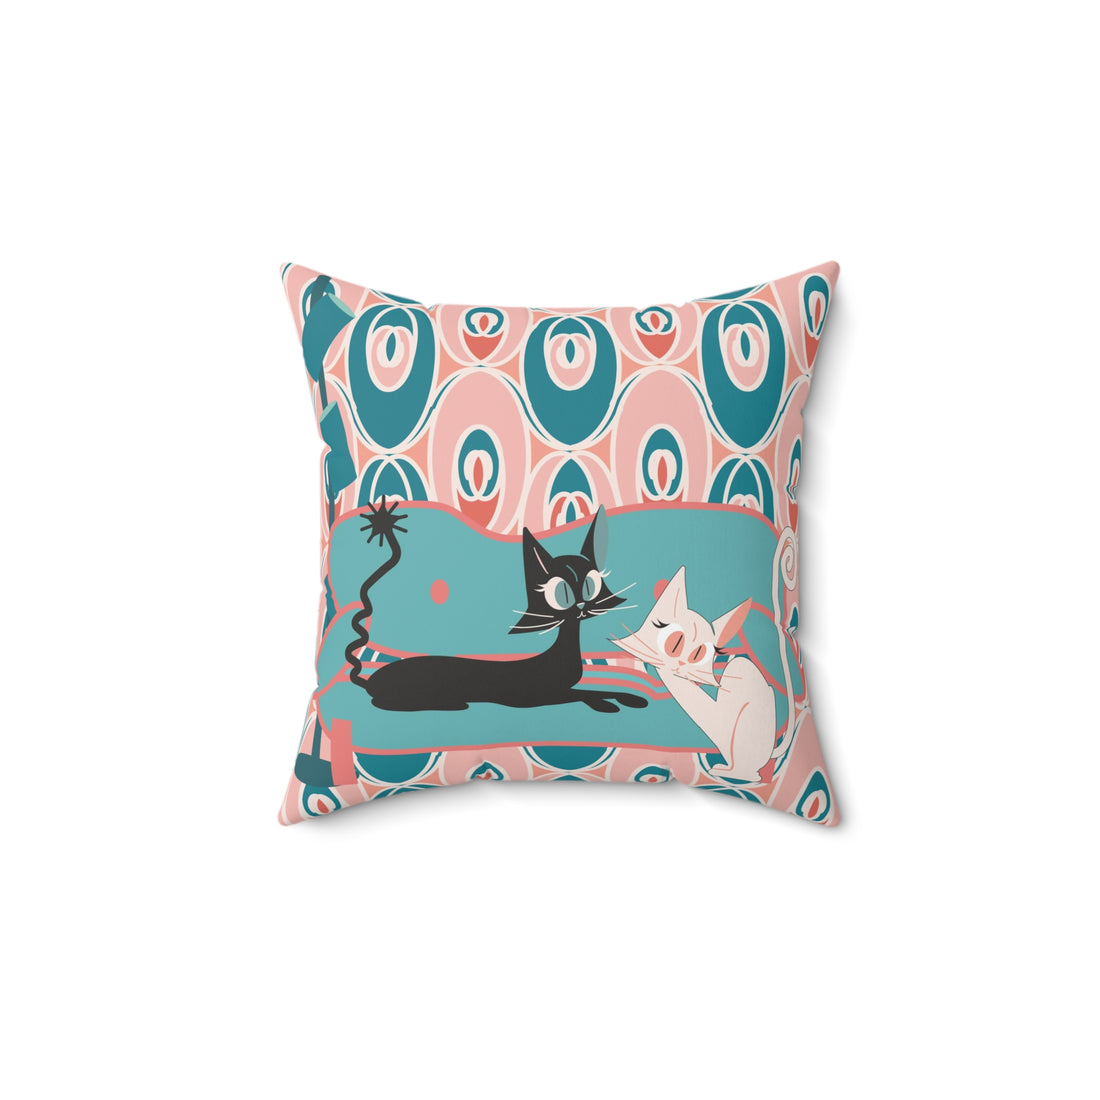 Atomic Black And White Kitty Cats, Mid Century Modern Teal Coral Pink, Kitschy Cute Pillow And Insert